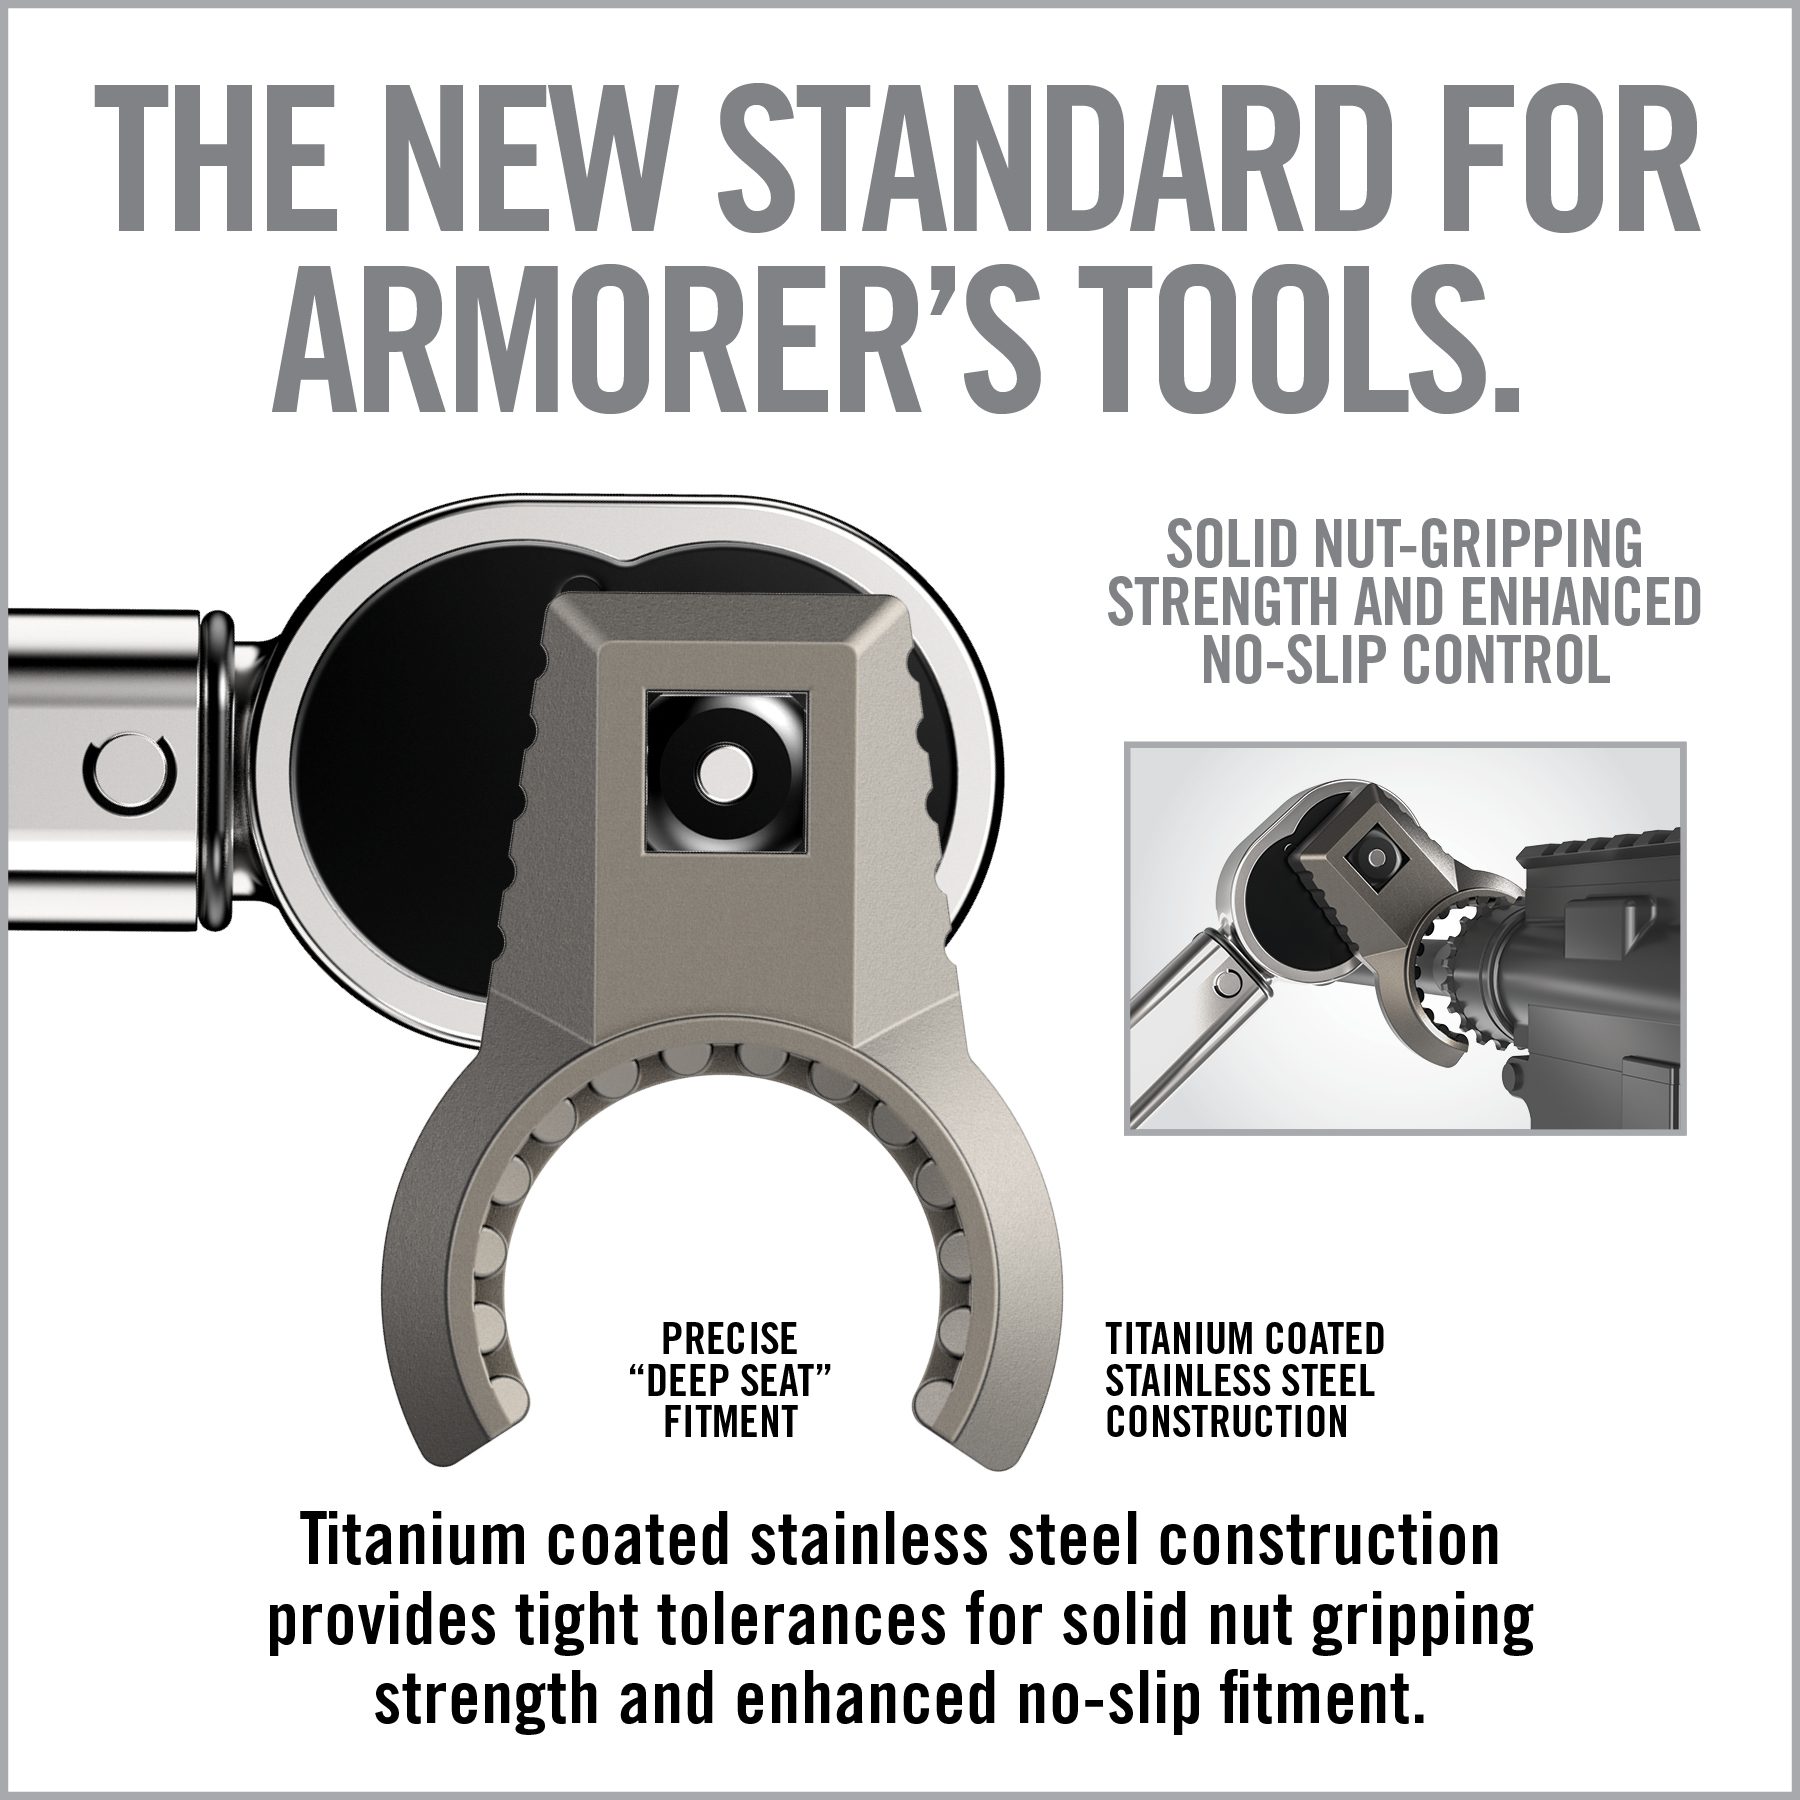 an advertisement for the new standard tool